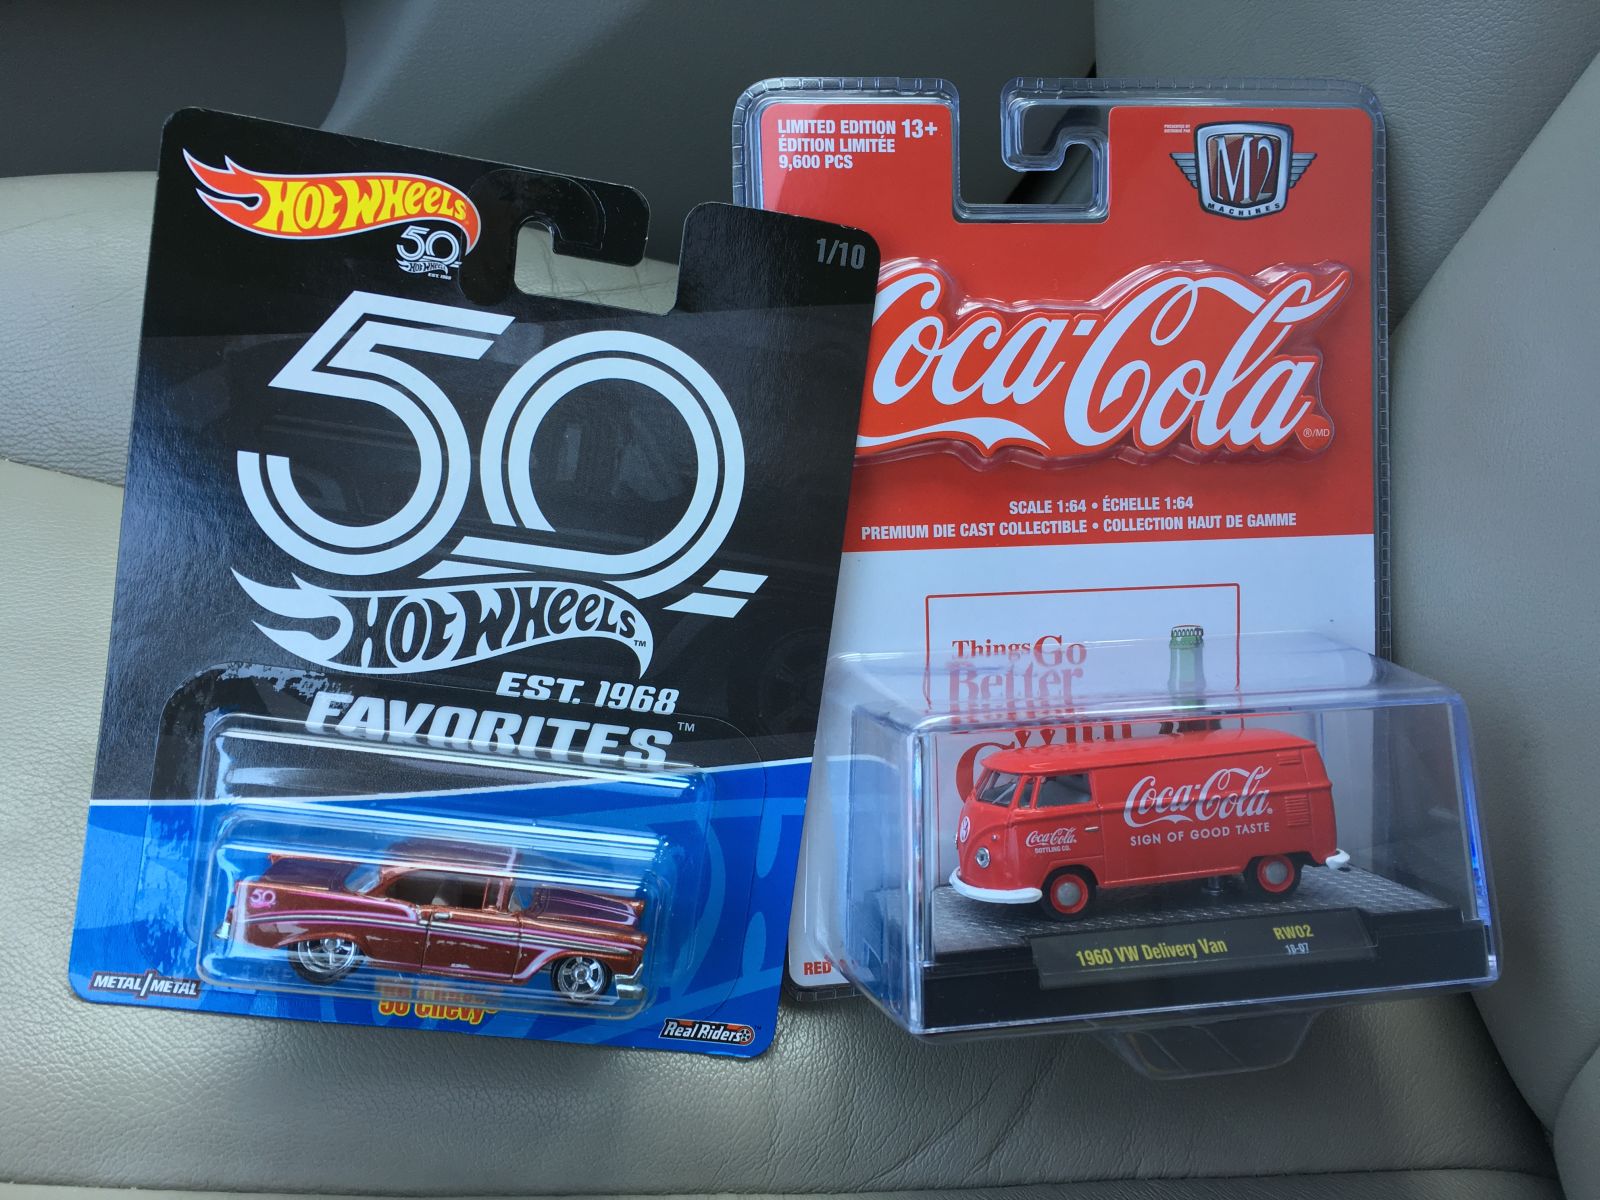 Had to to grab the ‘56 Chevy 50th ed. Favs as well.